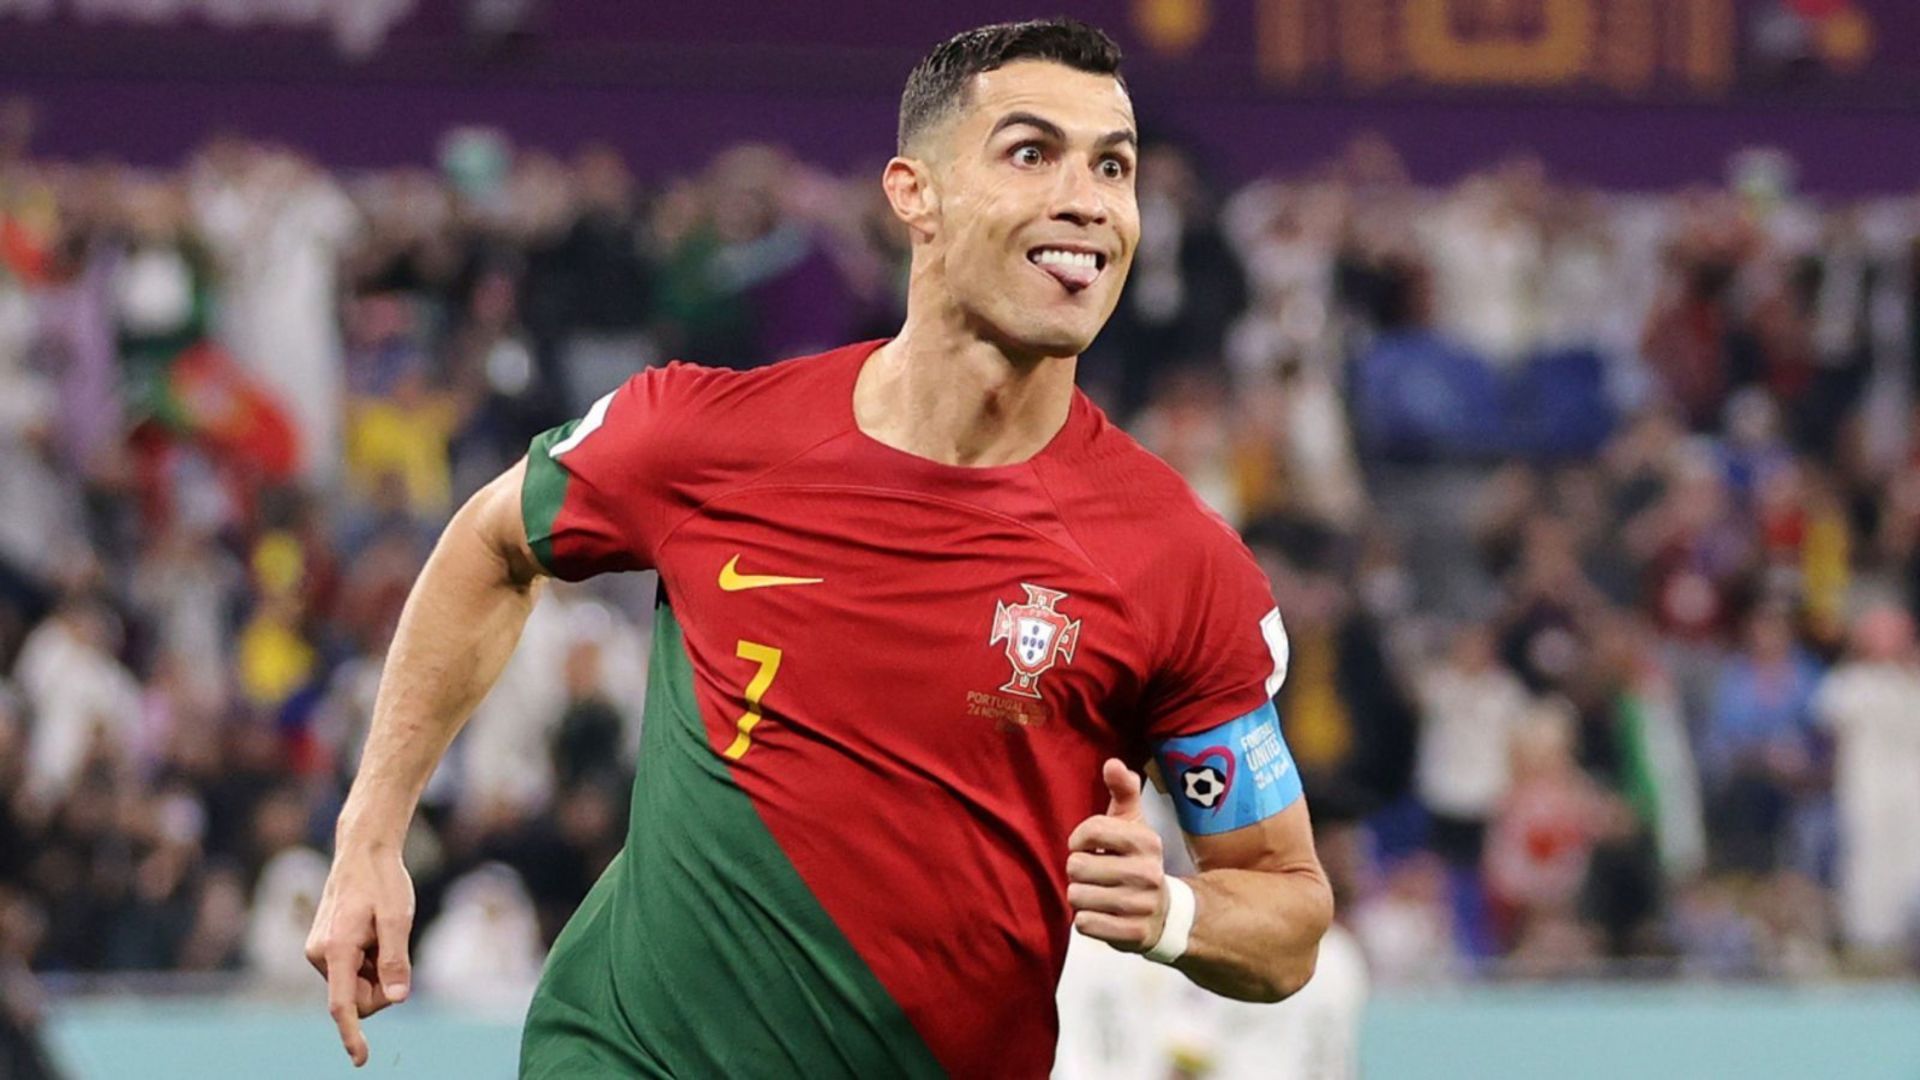 Cristiano Ronaldo is currently leading Portugal in the 2022 FIFA World Cup tournament